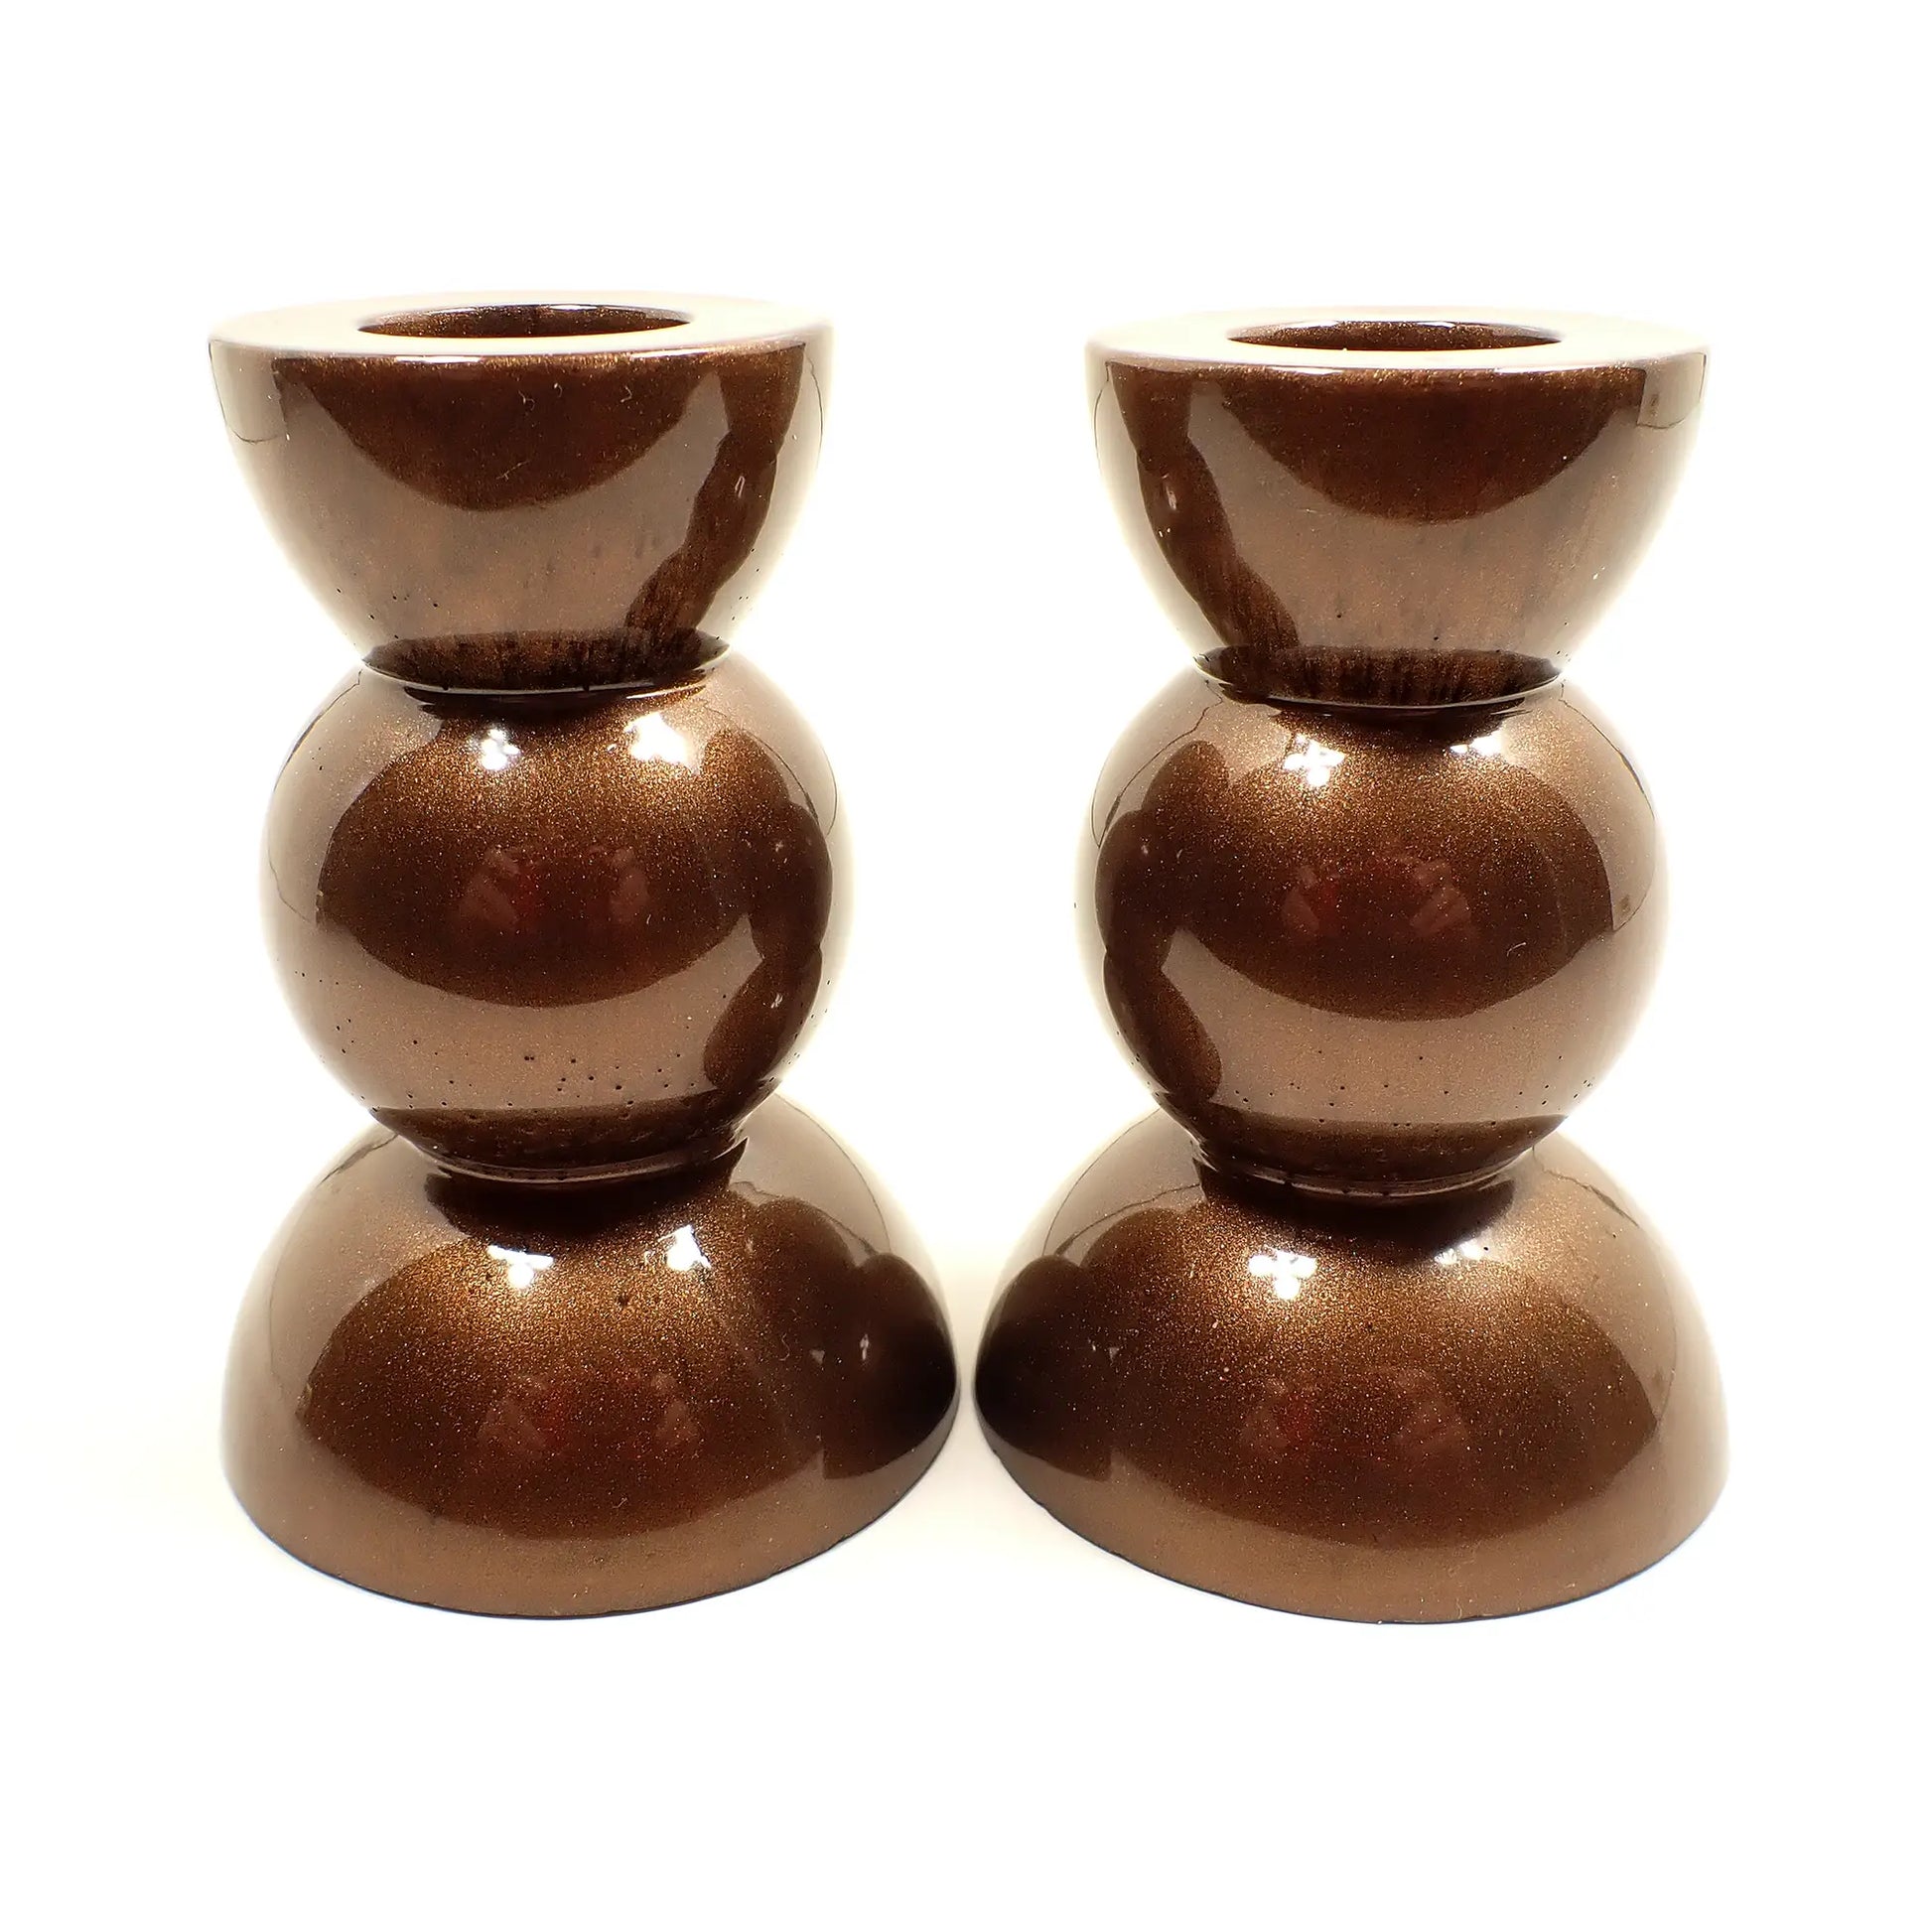 Side view of the handmade geometric candlestick holders. They have a round ball area in the middle and a semi sphere shape on the top and bottom. The resin is a pearly chocolate brown color.